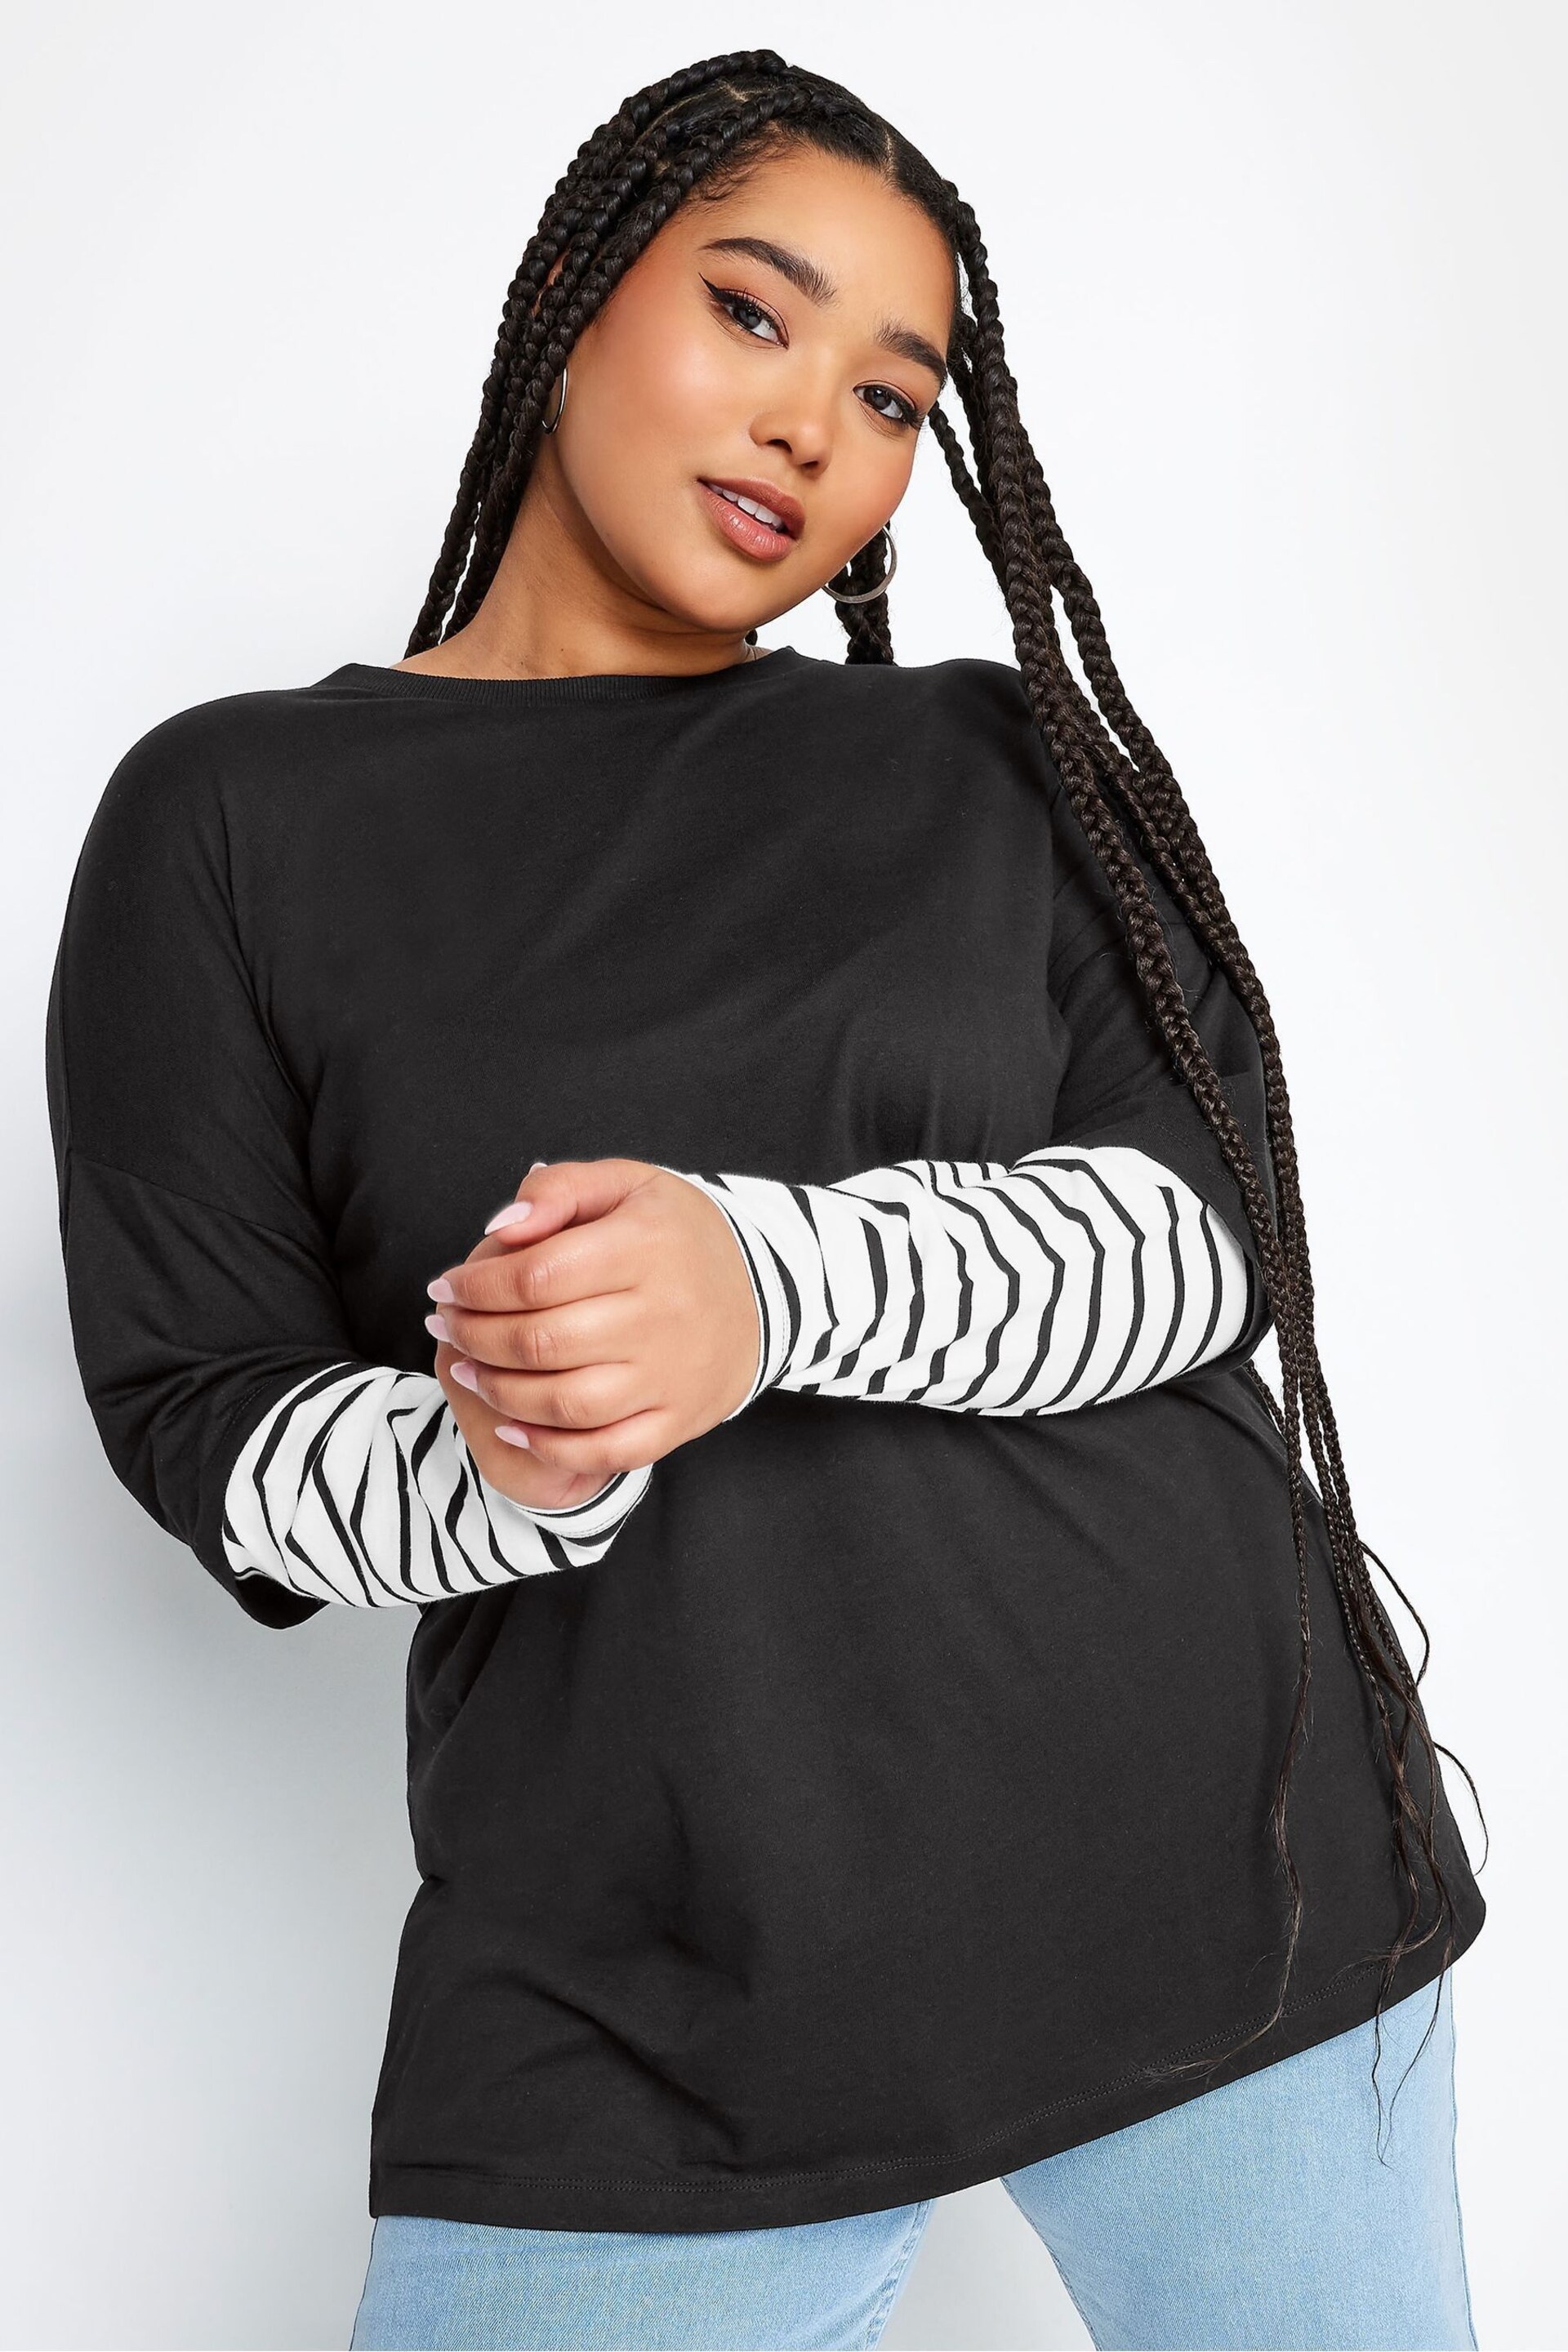 Yours Curve Black 2 In 1 Stripe Sleeve Top - Image 1 of 4